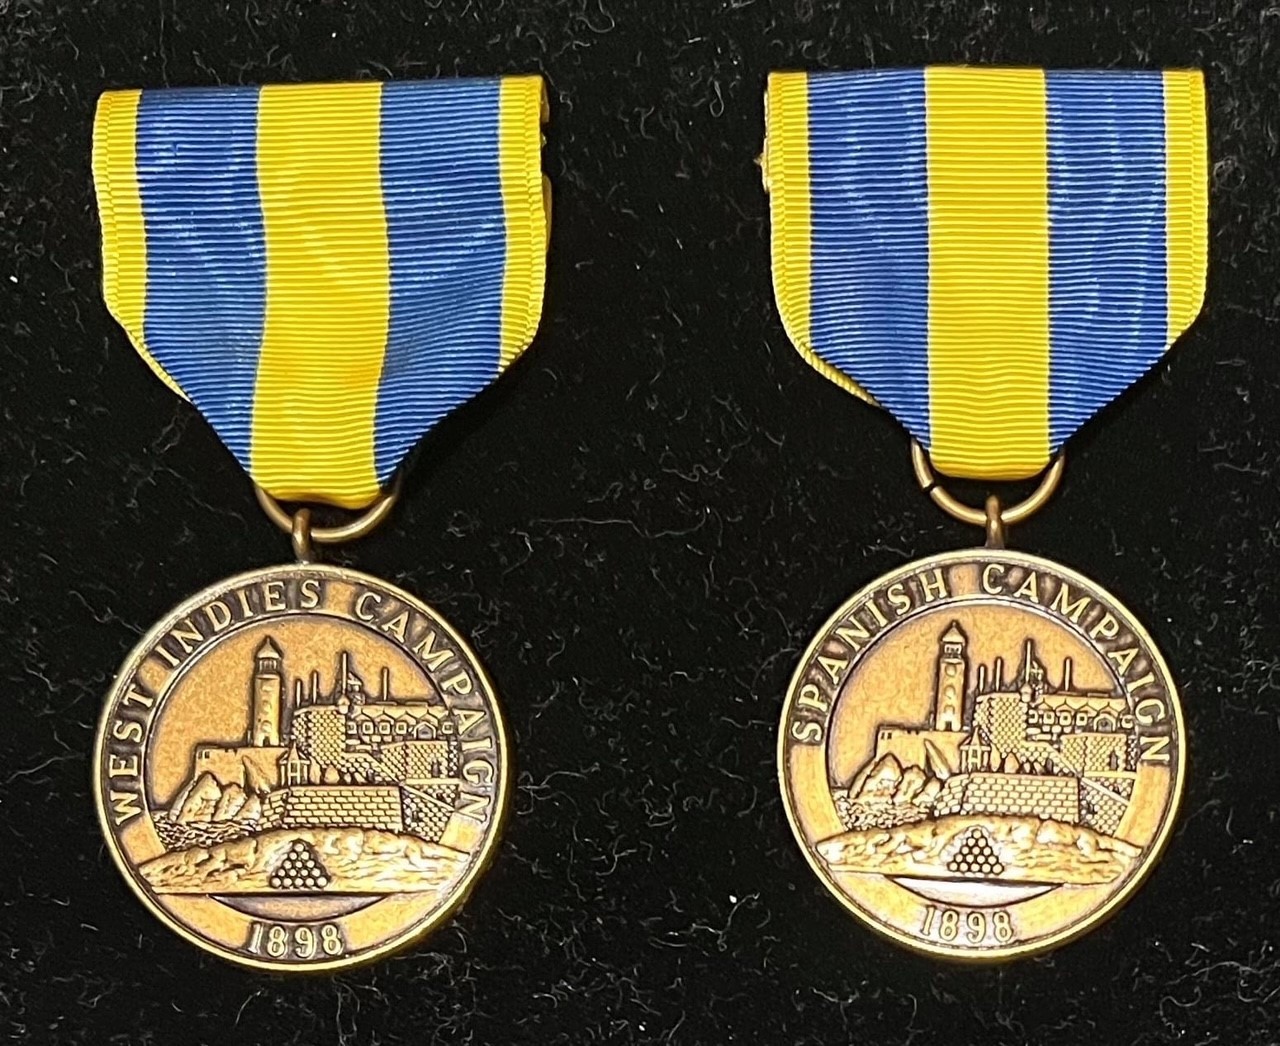 Campaign medals.